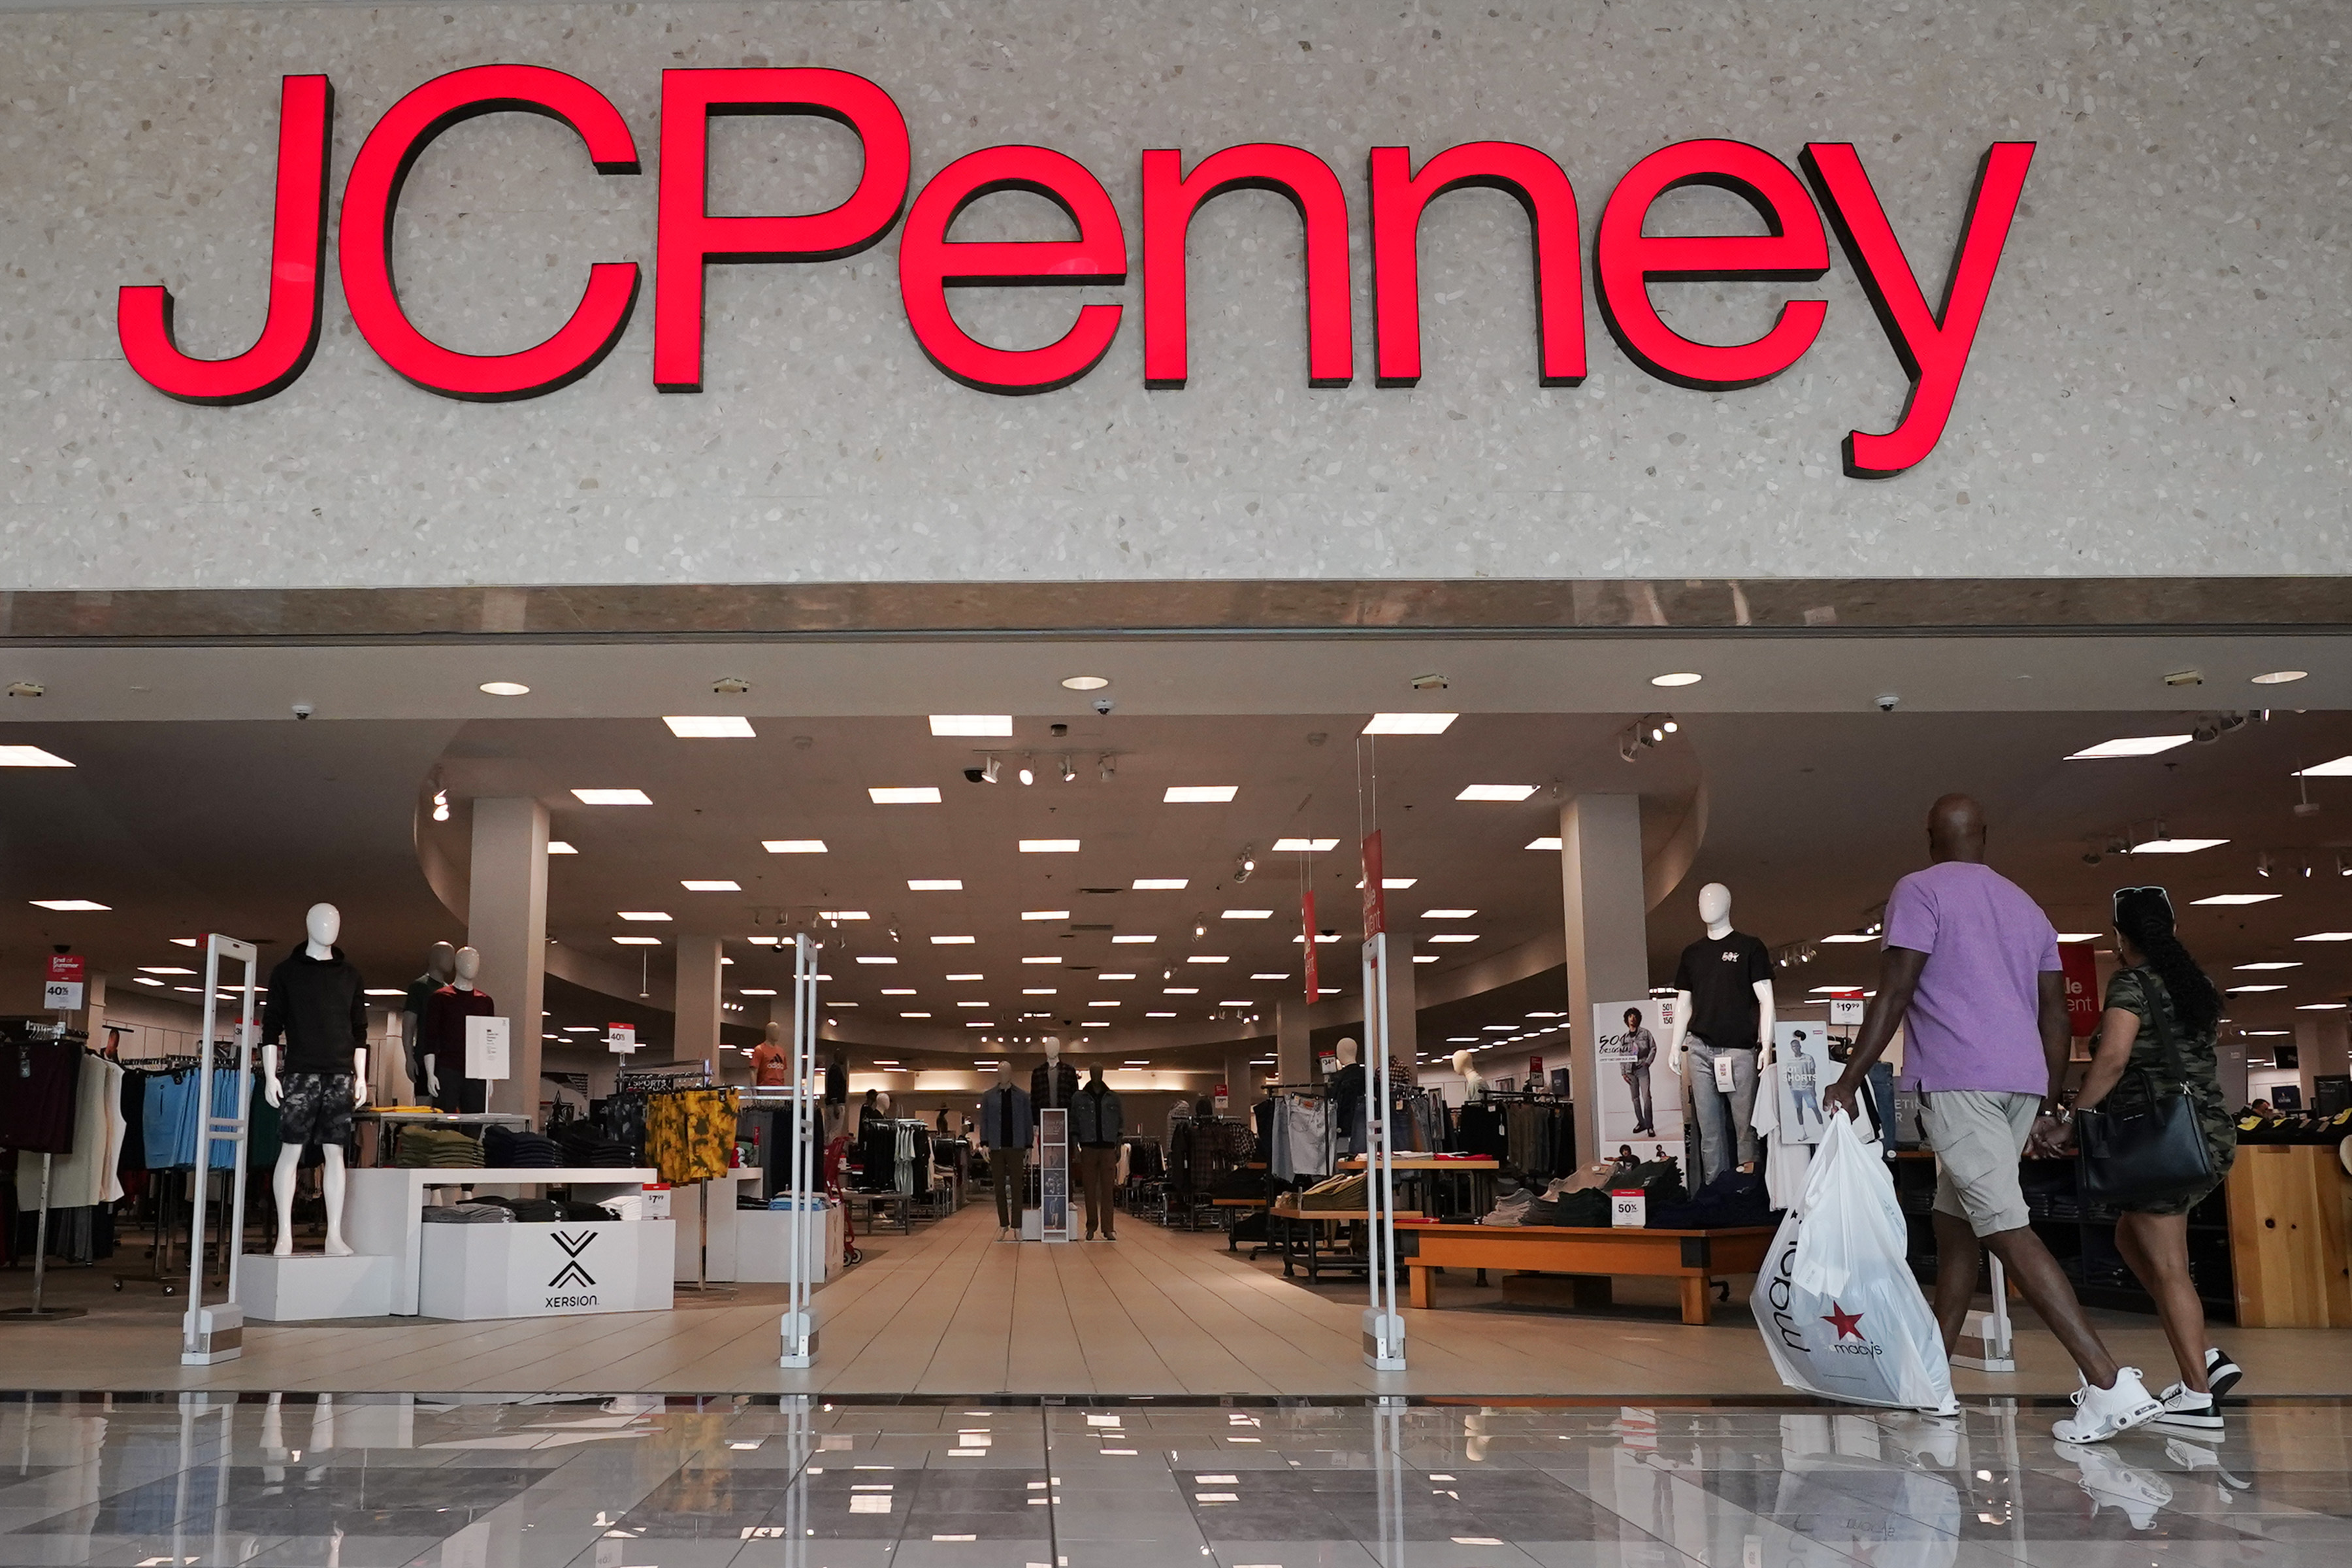 update] JCPenney Beauty Brands & Locations Announced